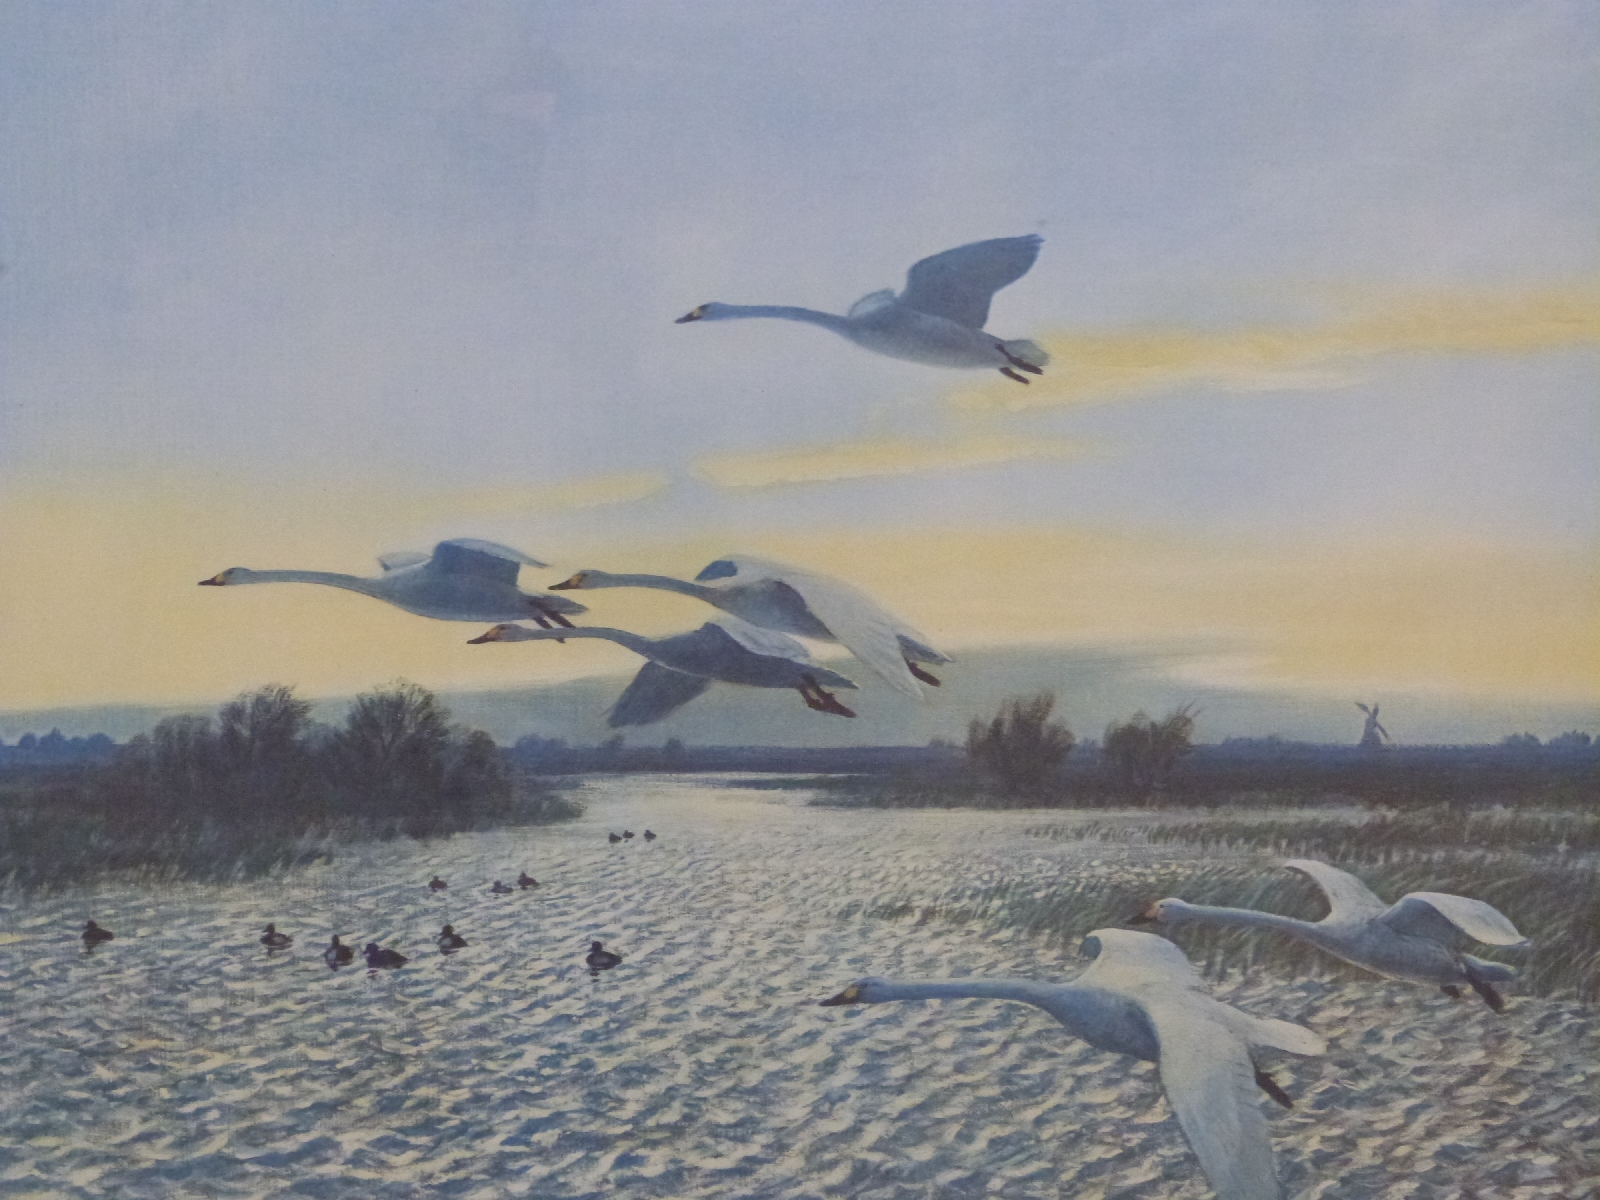 Peter Scott signed print 'North Wind Bewick Swans', 44 x 55cm, with original receipts and invitation